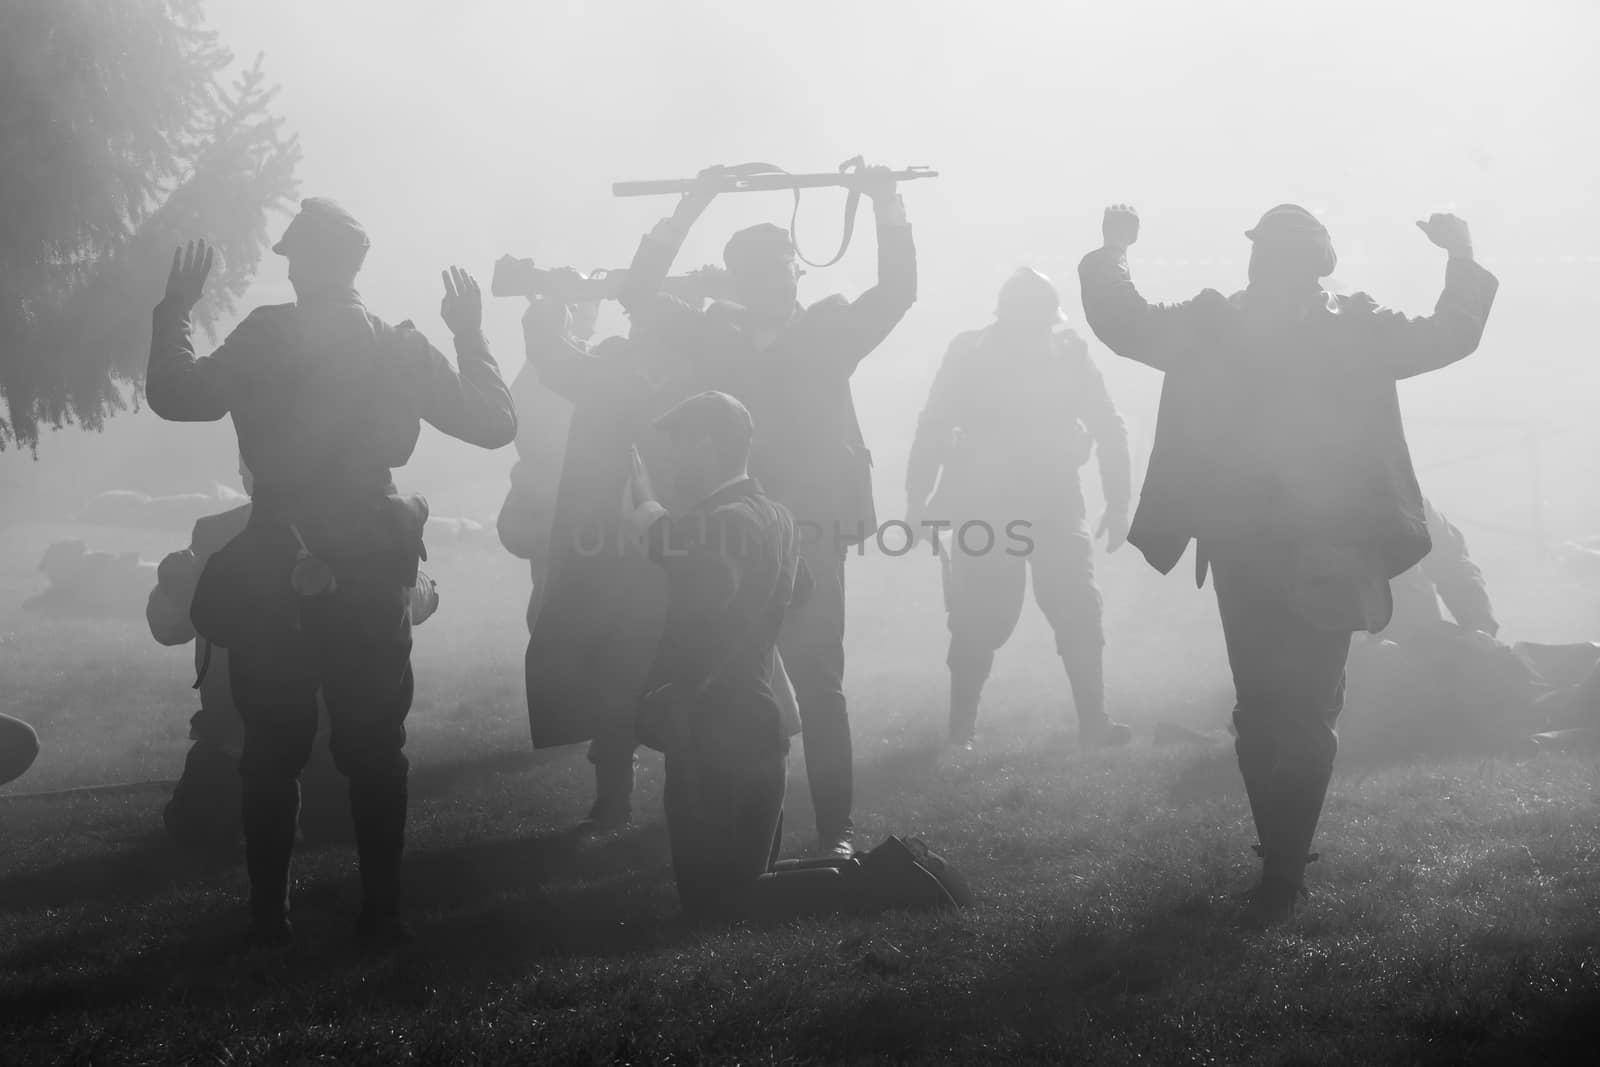 Silhouettes of Soldiers in uniforms during Worl War with rifles on battlefield. All area is in smoke and sunrays peeking thru.